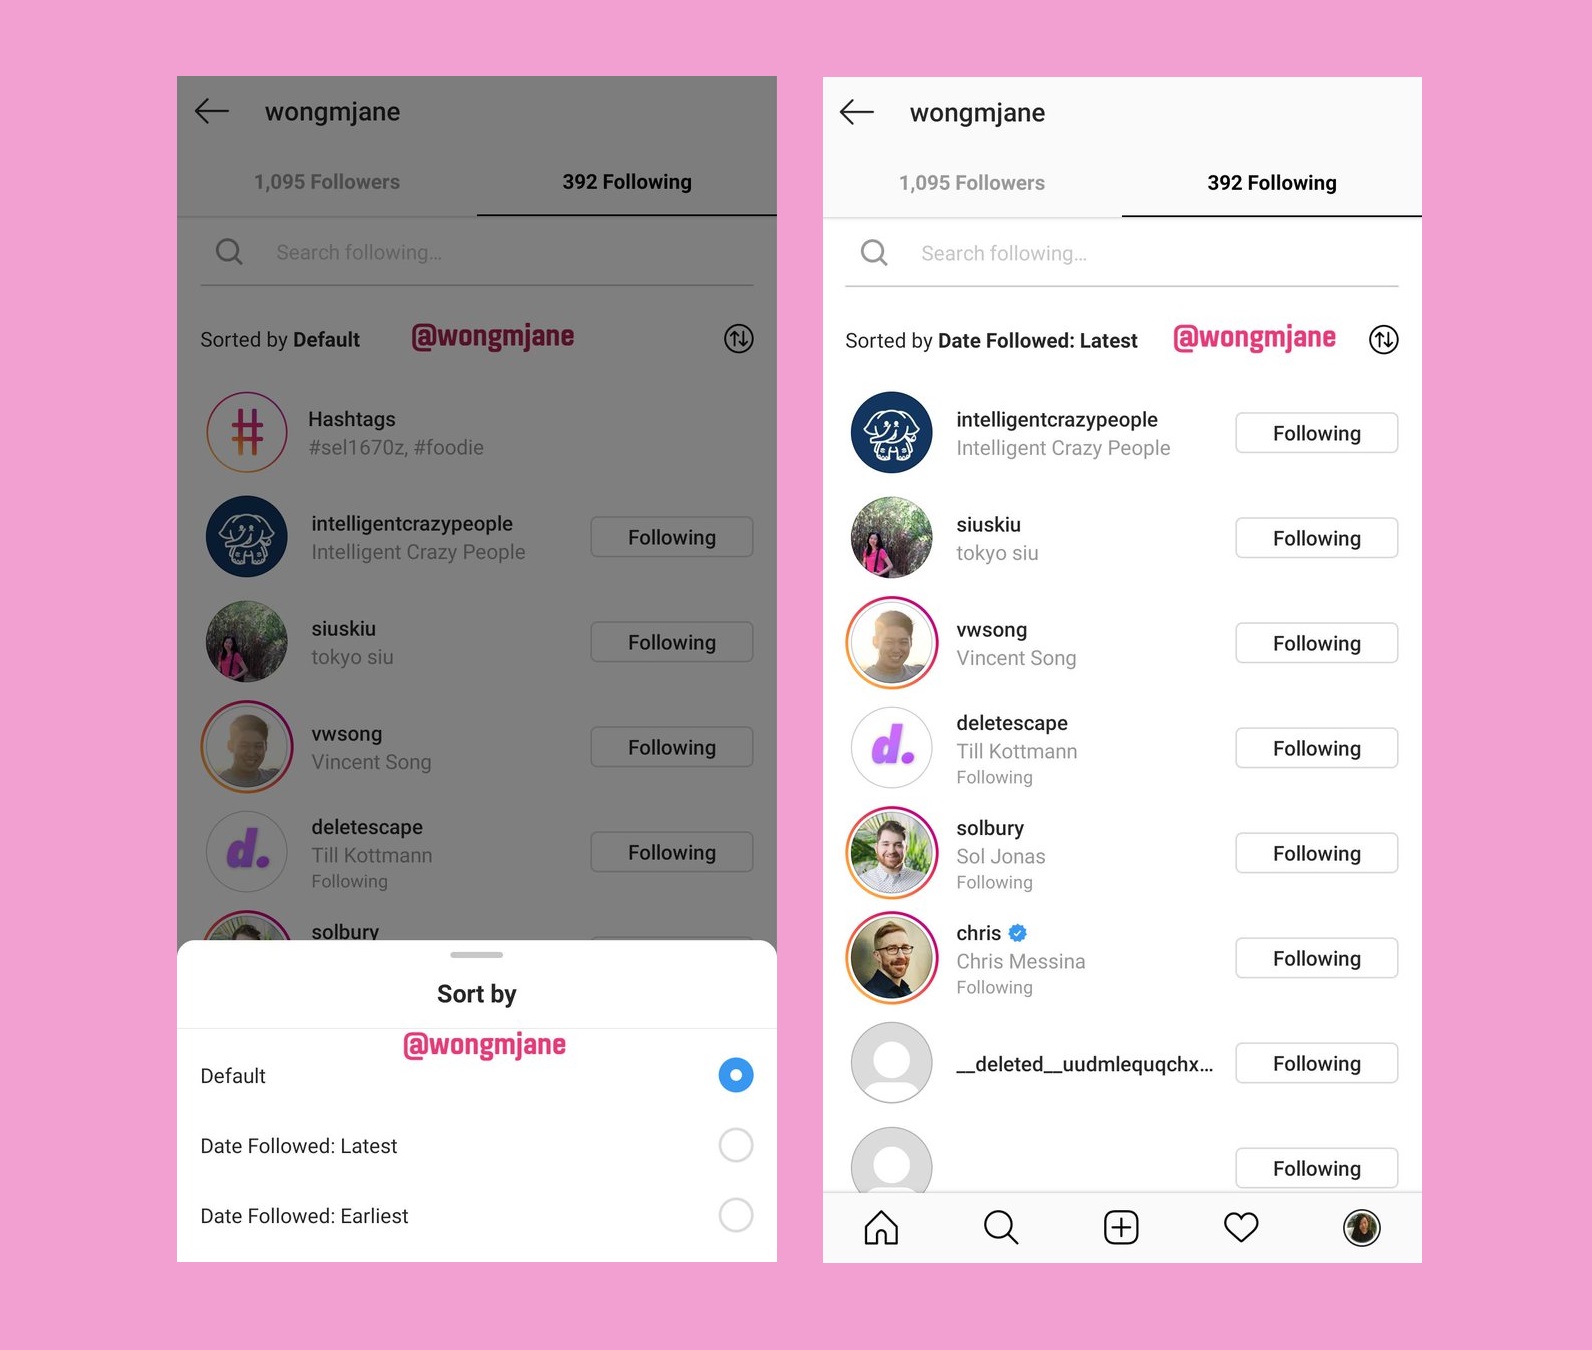 instagram s unreleased features discovered through reverse engineering by a twitter user - instagram follow train websites